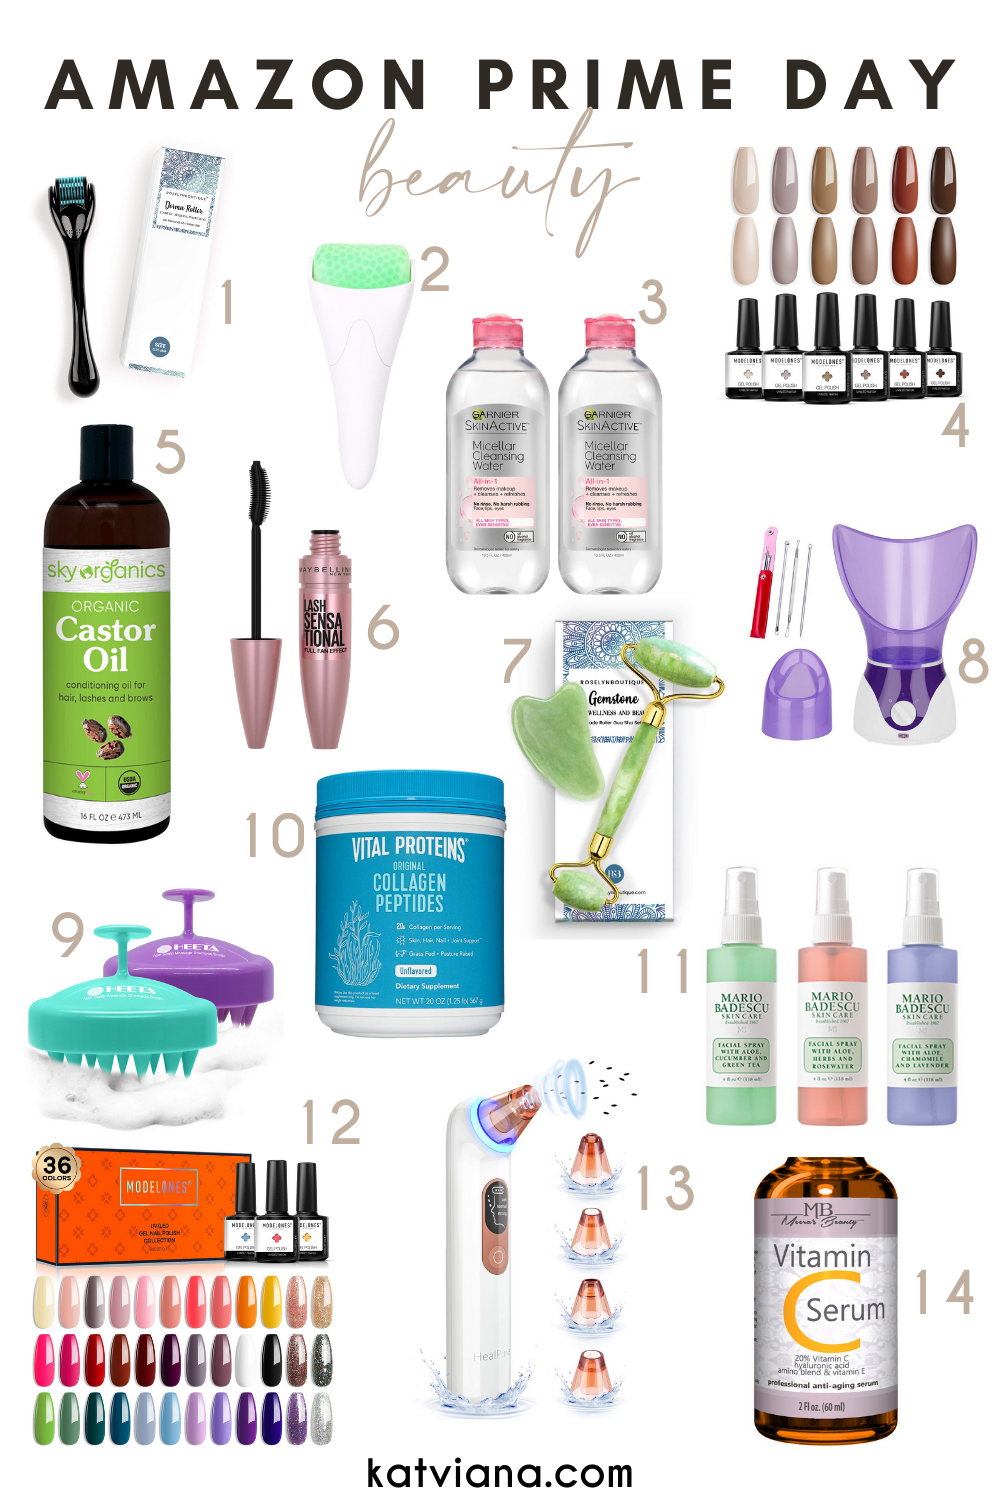 Amazon Prime Day Sale Must Have Items- Beauty | Kat Viana